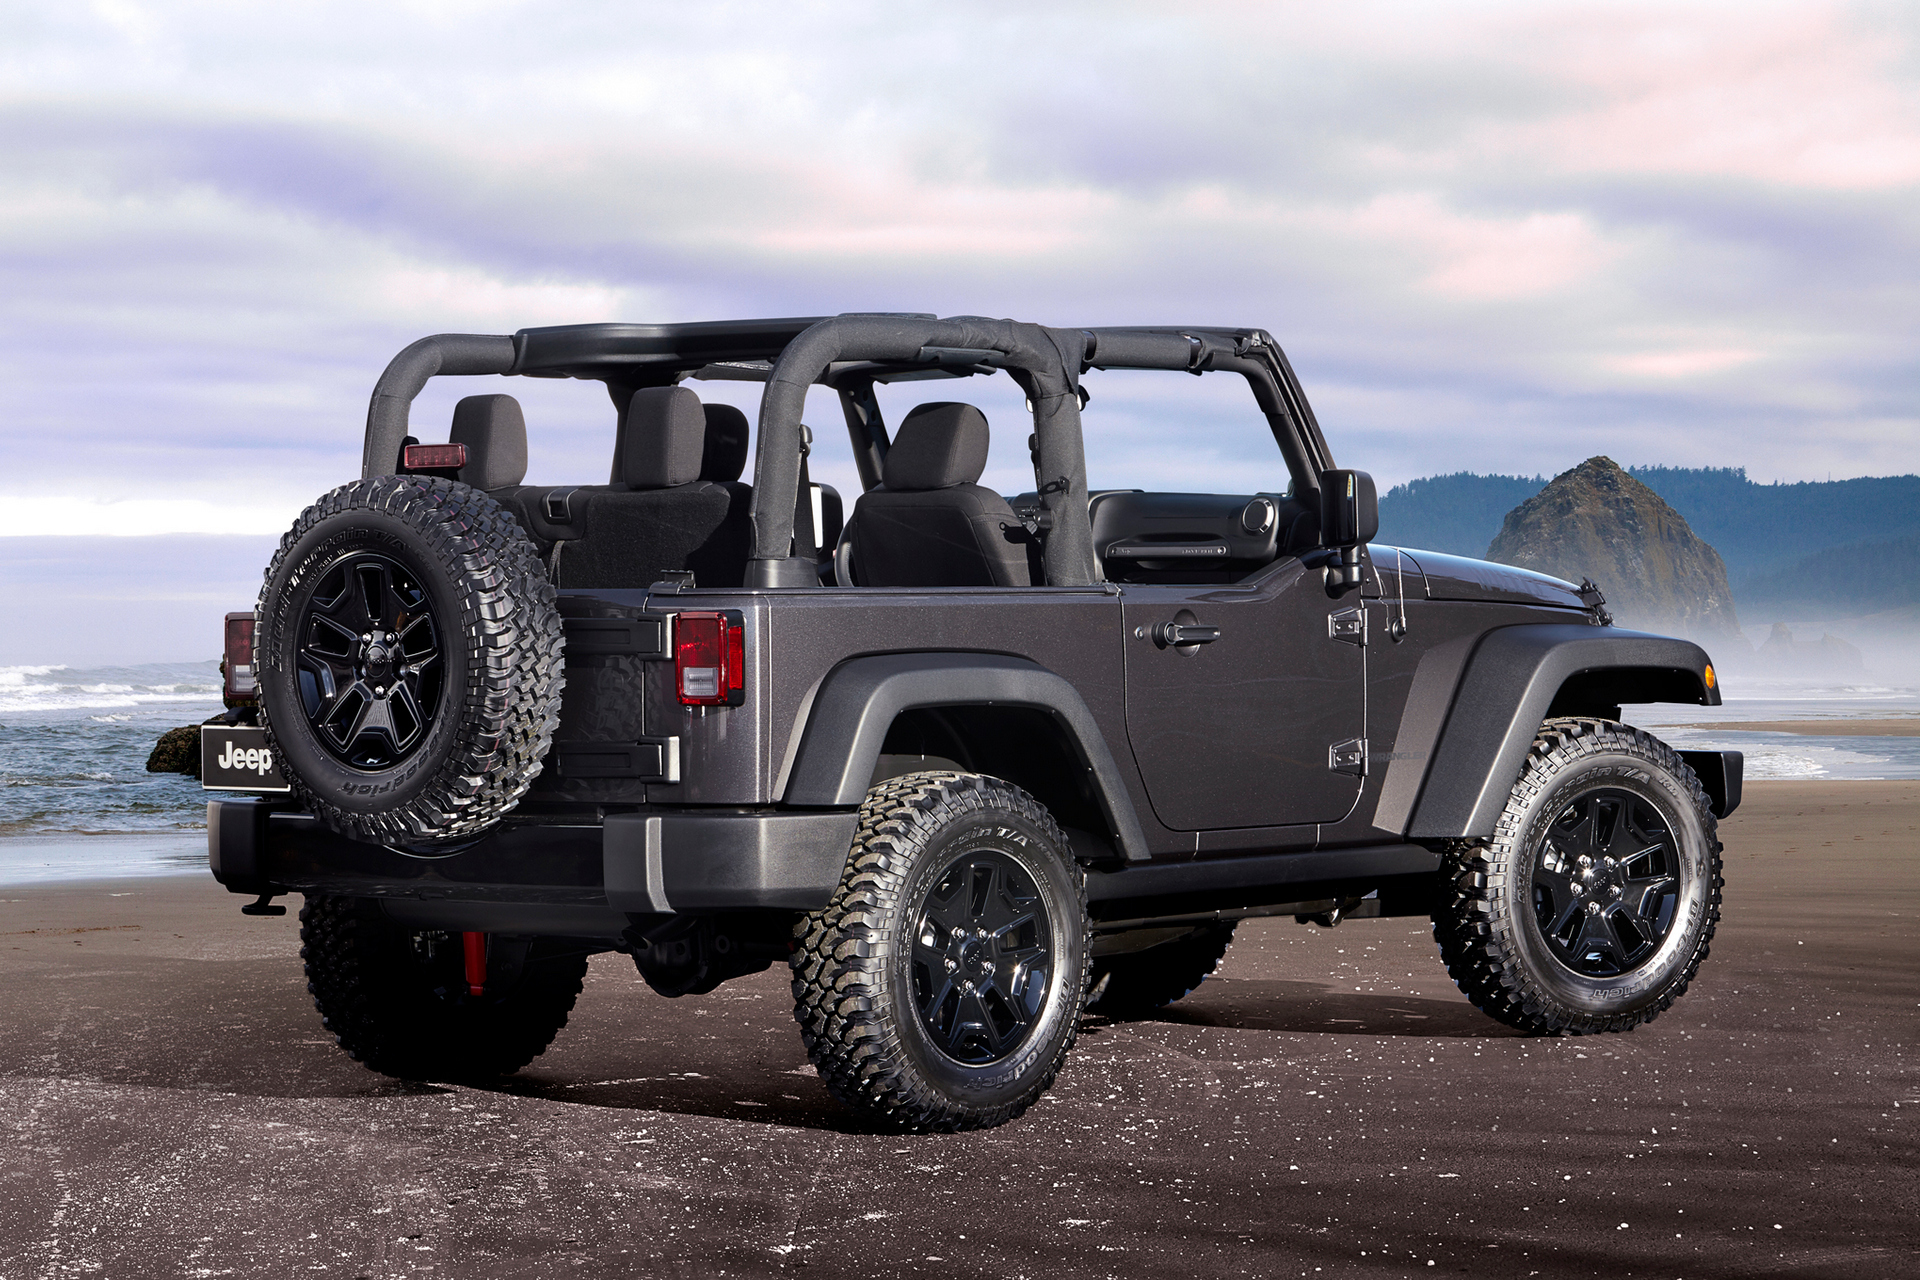 How Much Does a Jeep Wrangler Cost? - Carrrs Auto Portal